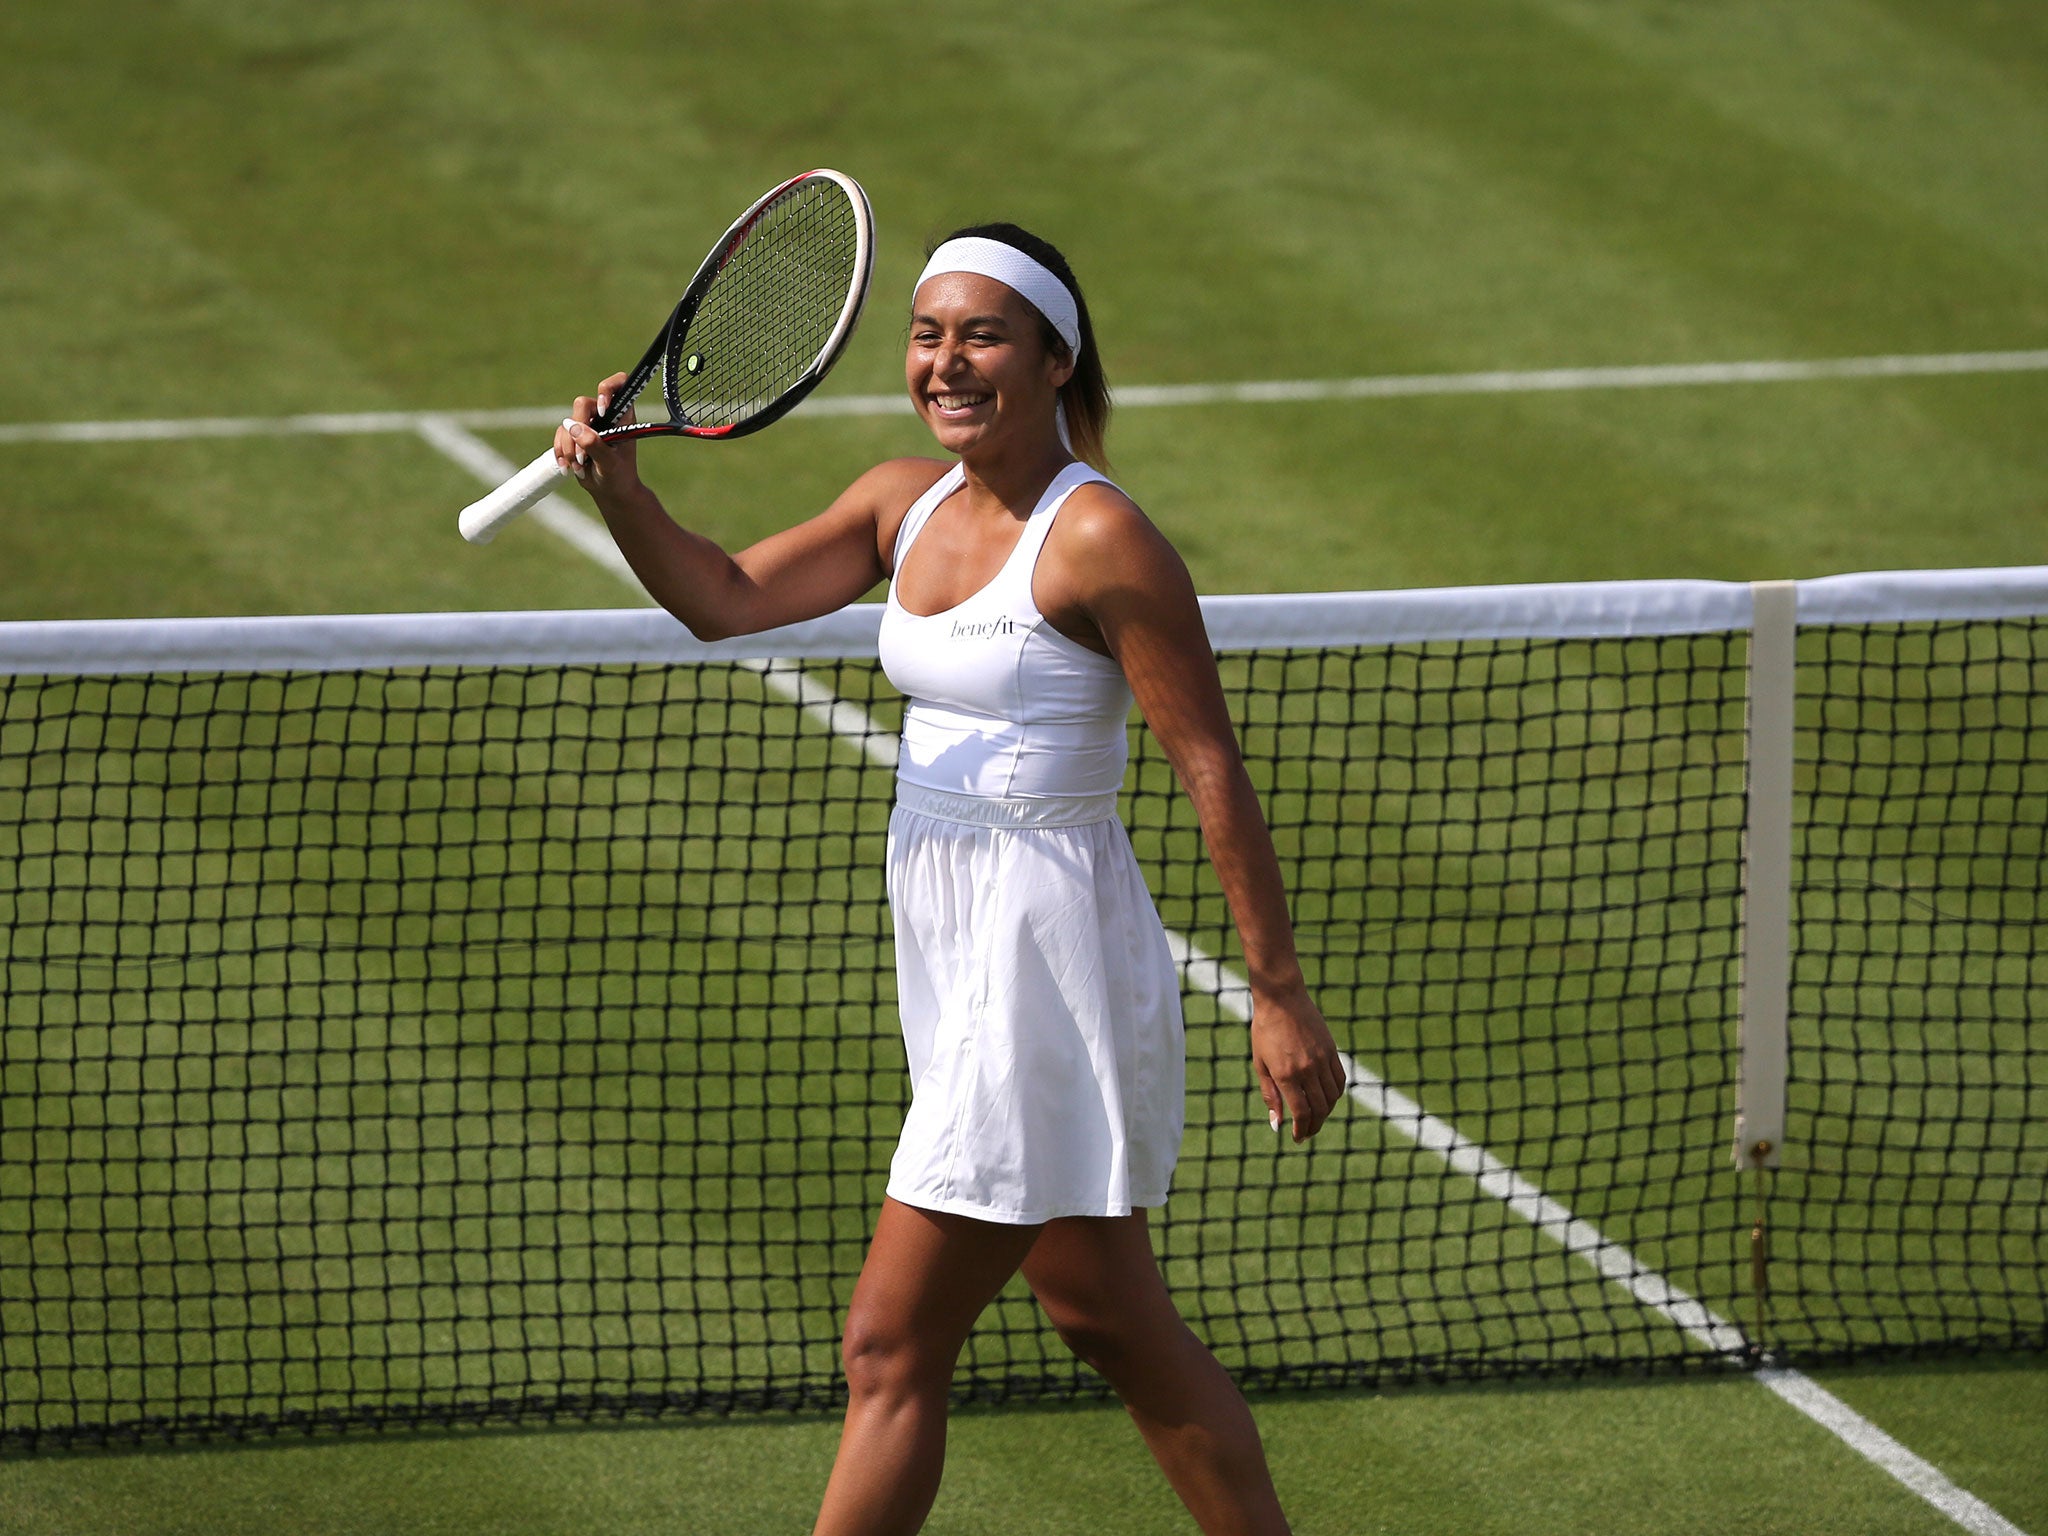 Britain's Heather Watson celebrates after winning her women's singles first round match against Croatia's Ajla Tomljanovic on day two of the 2014 Wimbledon Championships